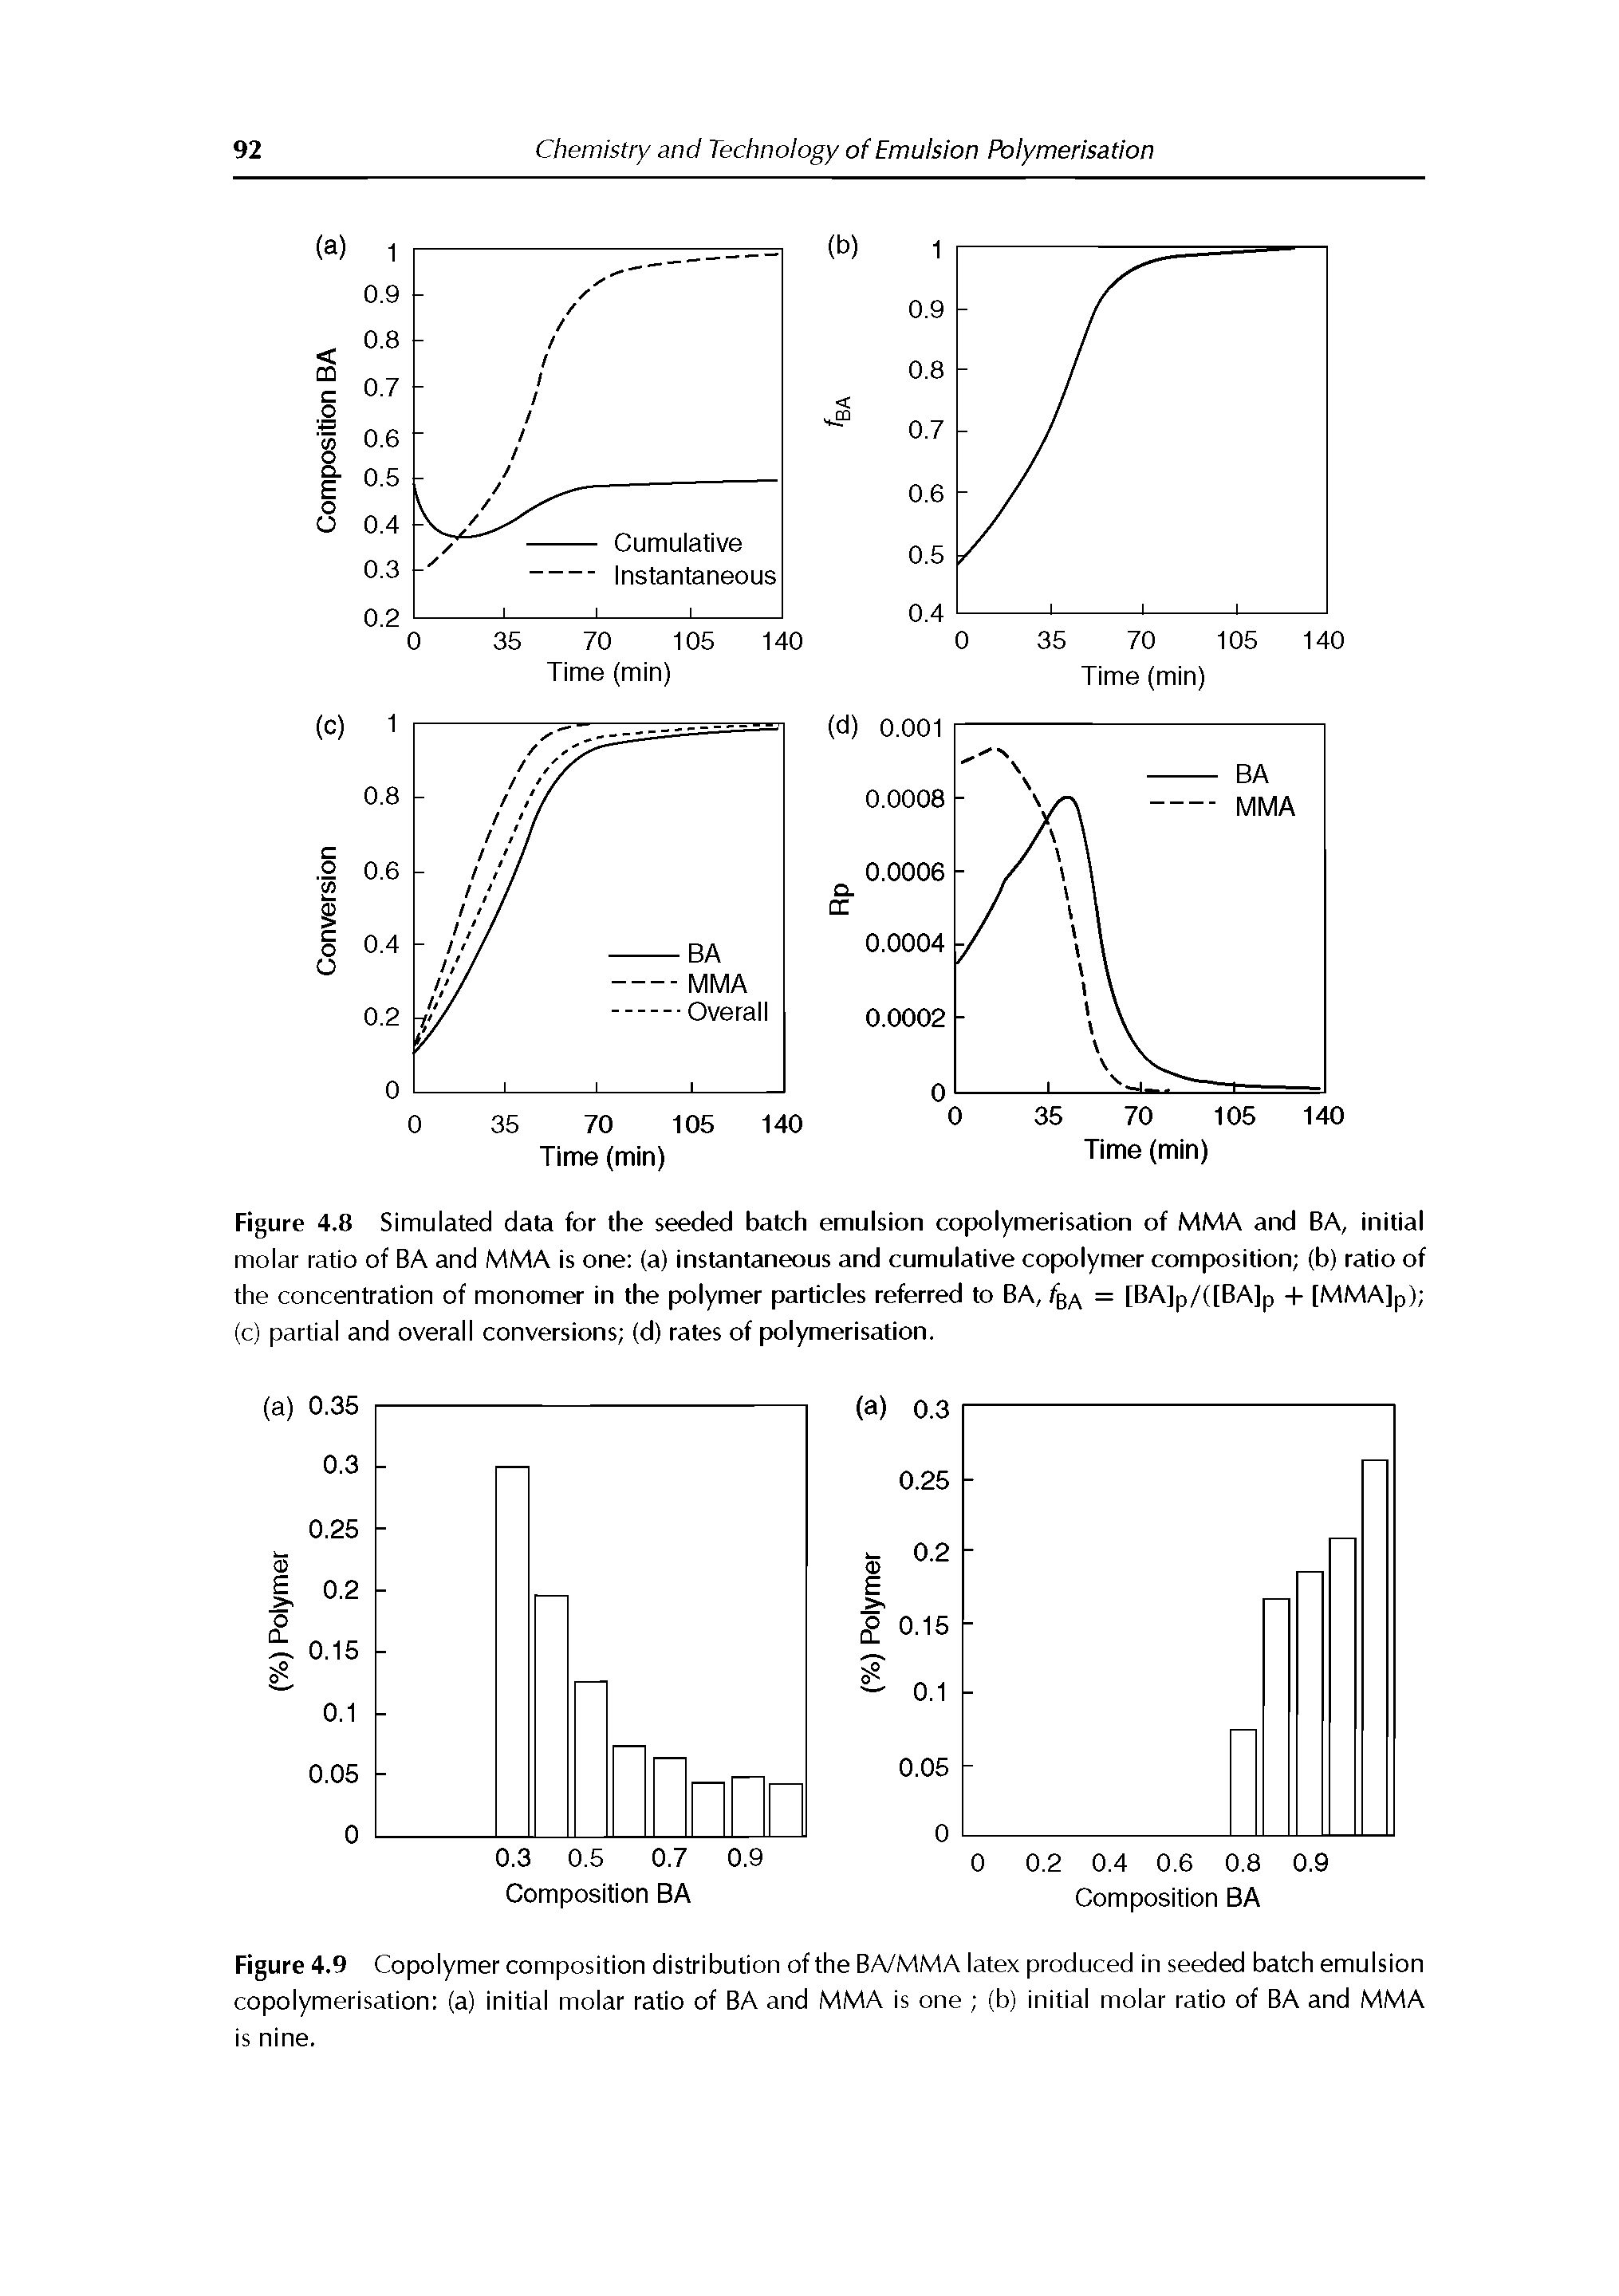 Figure 4.9 Copolymer composition distribution of the BA/MMA latex produced in seeded batch emulsion copolymerisation (a) initial molar ratio of BA and MMA is one (b) initial molar ratio of BA and MMA is nine.